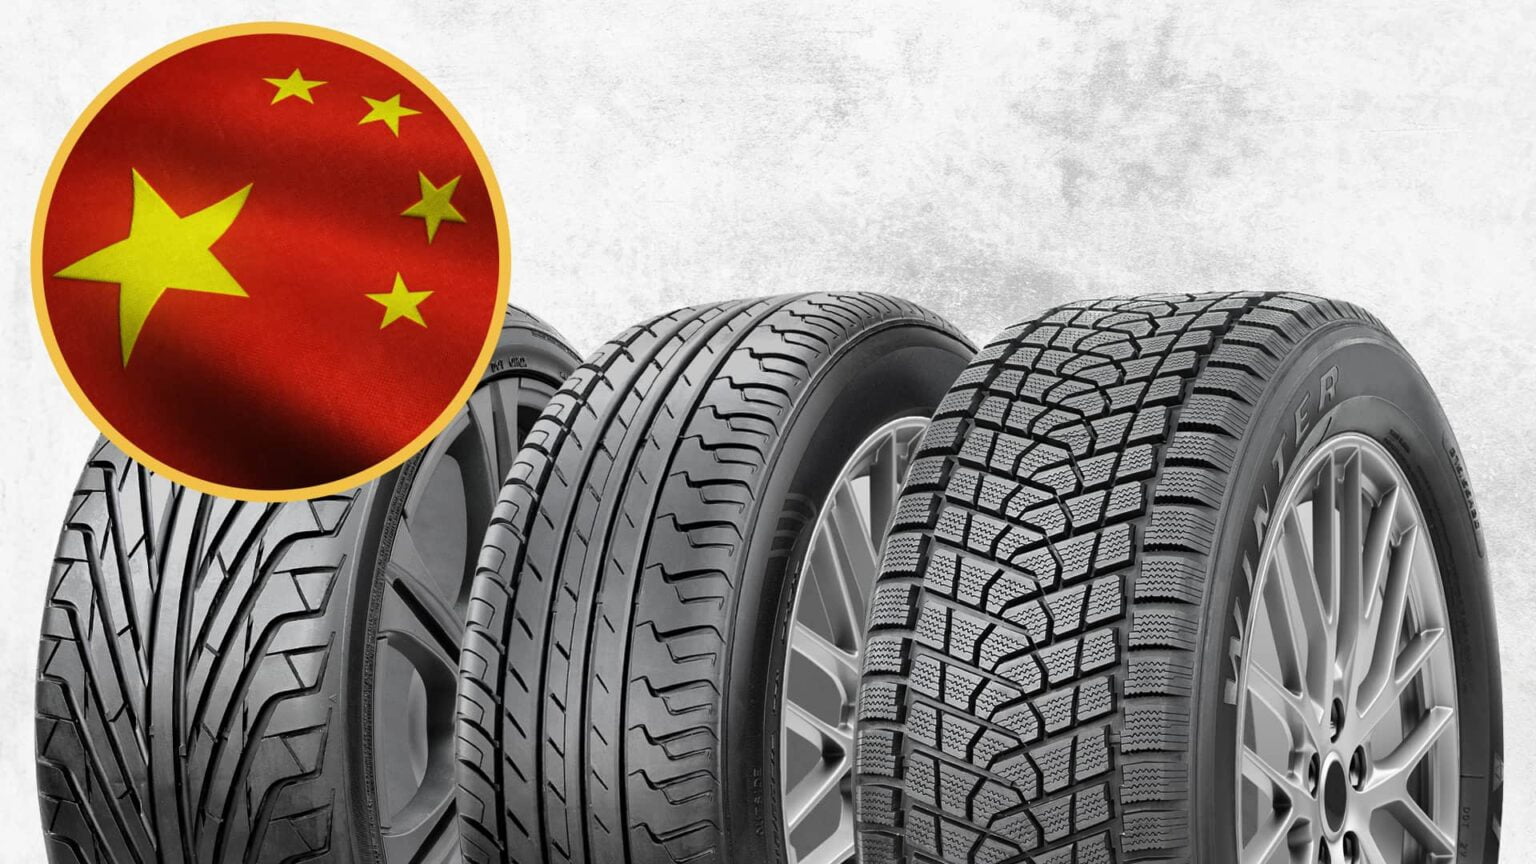 Chinese Tire Manufacturers An Overview of the Top 11 Industry Leaders